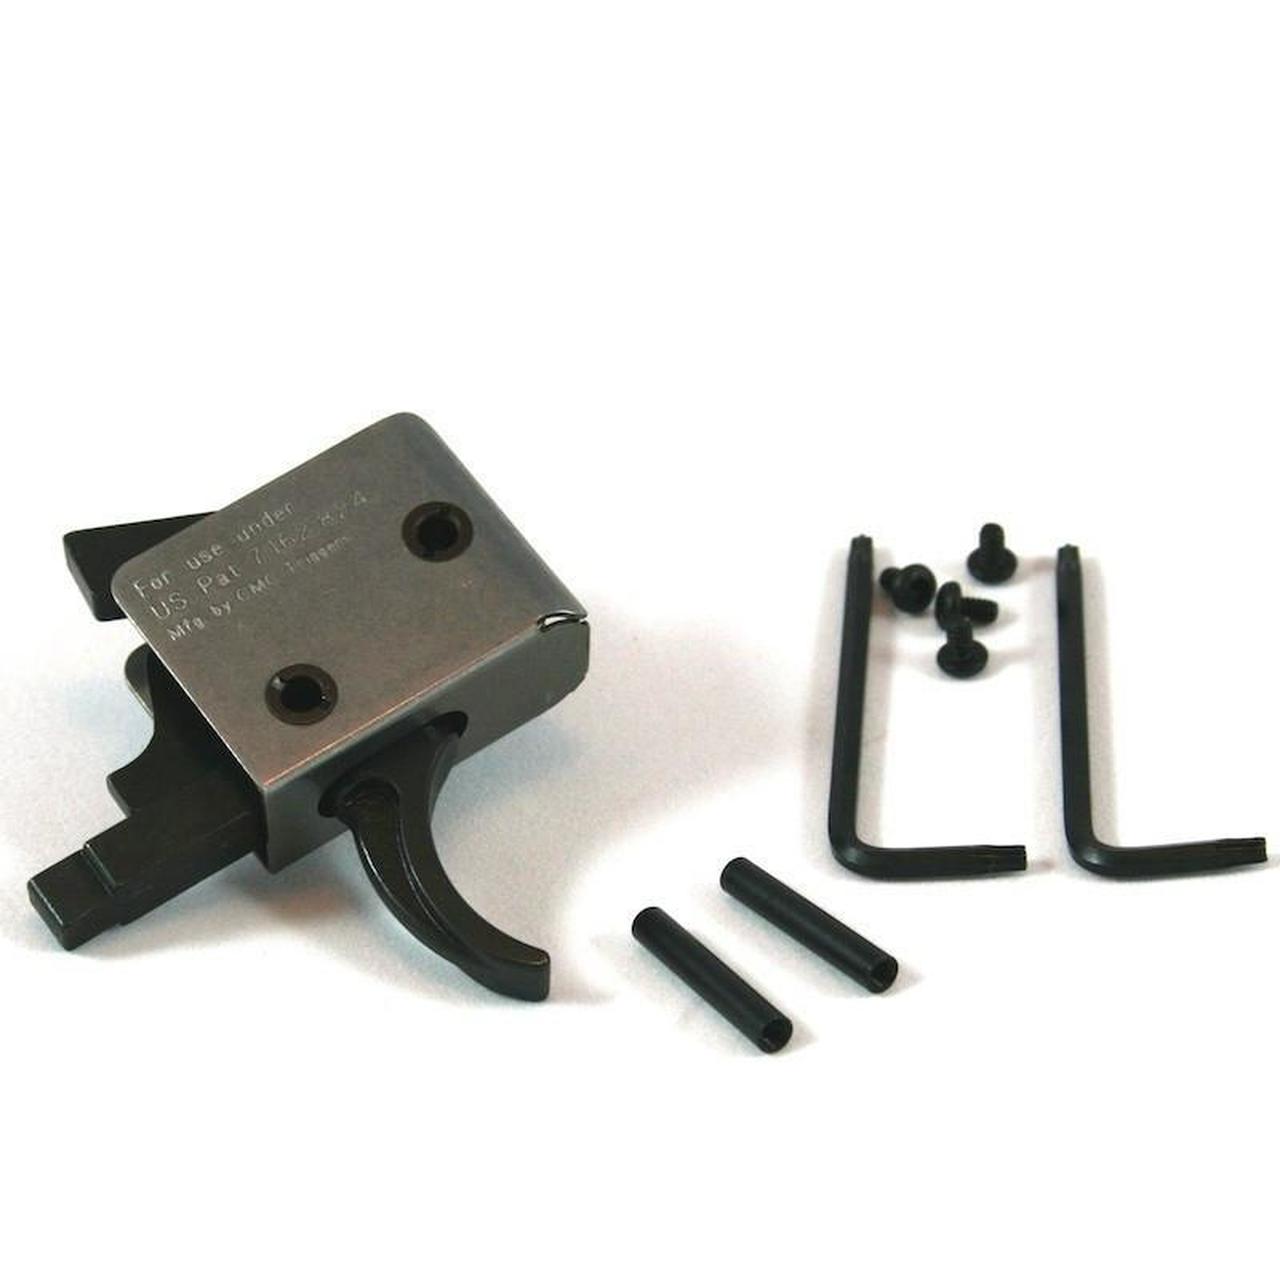 A CMC Curved 3.5 pound Trigger. Probably the best single-stage trigger on the market.